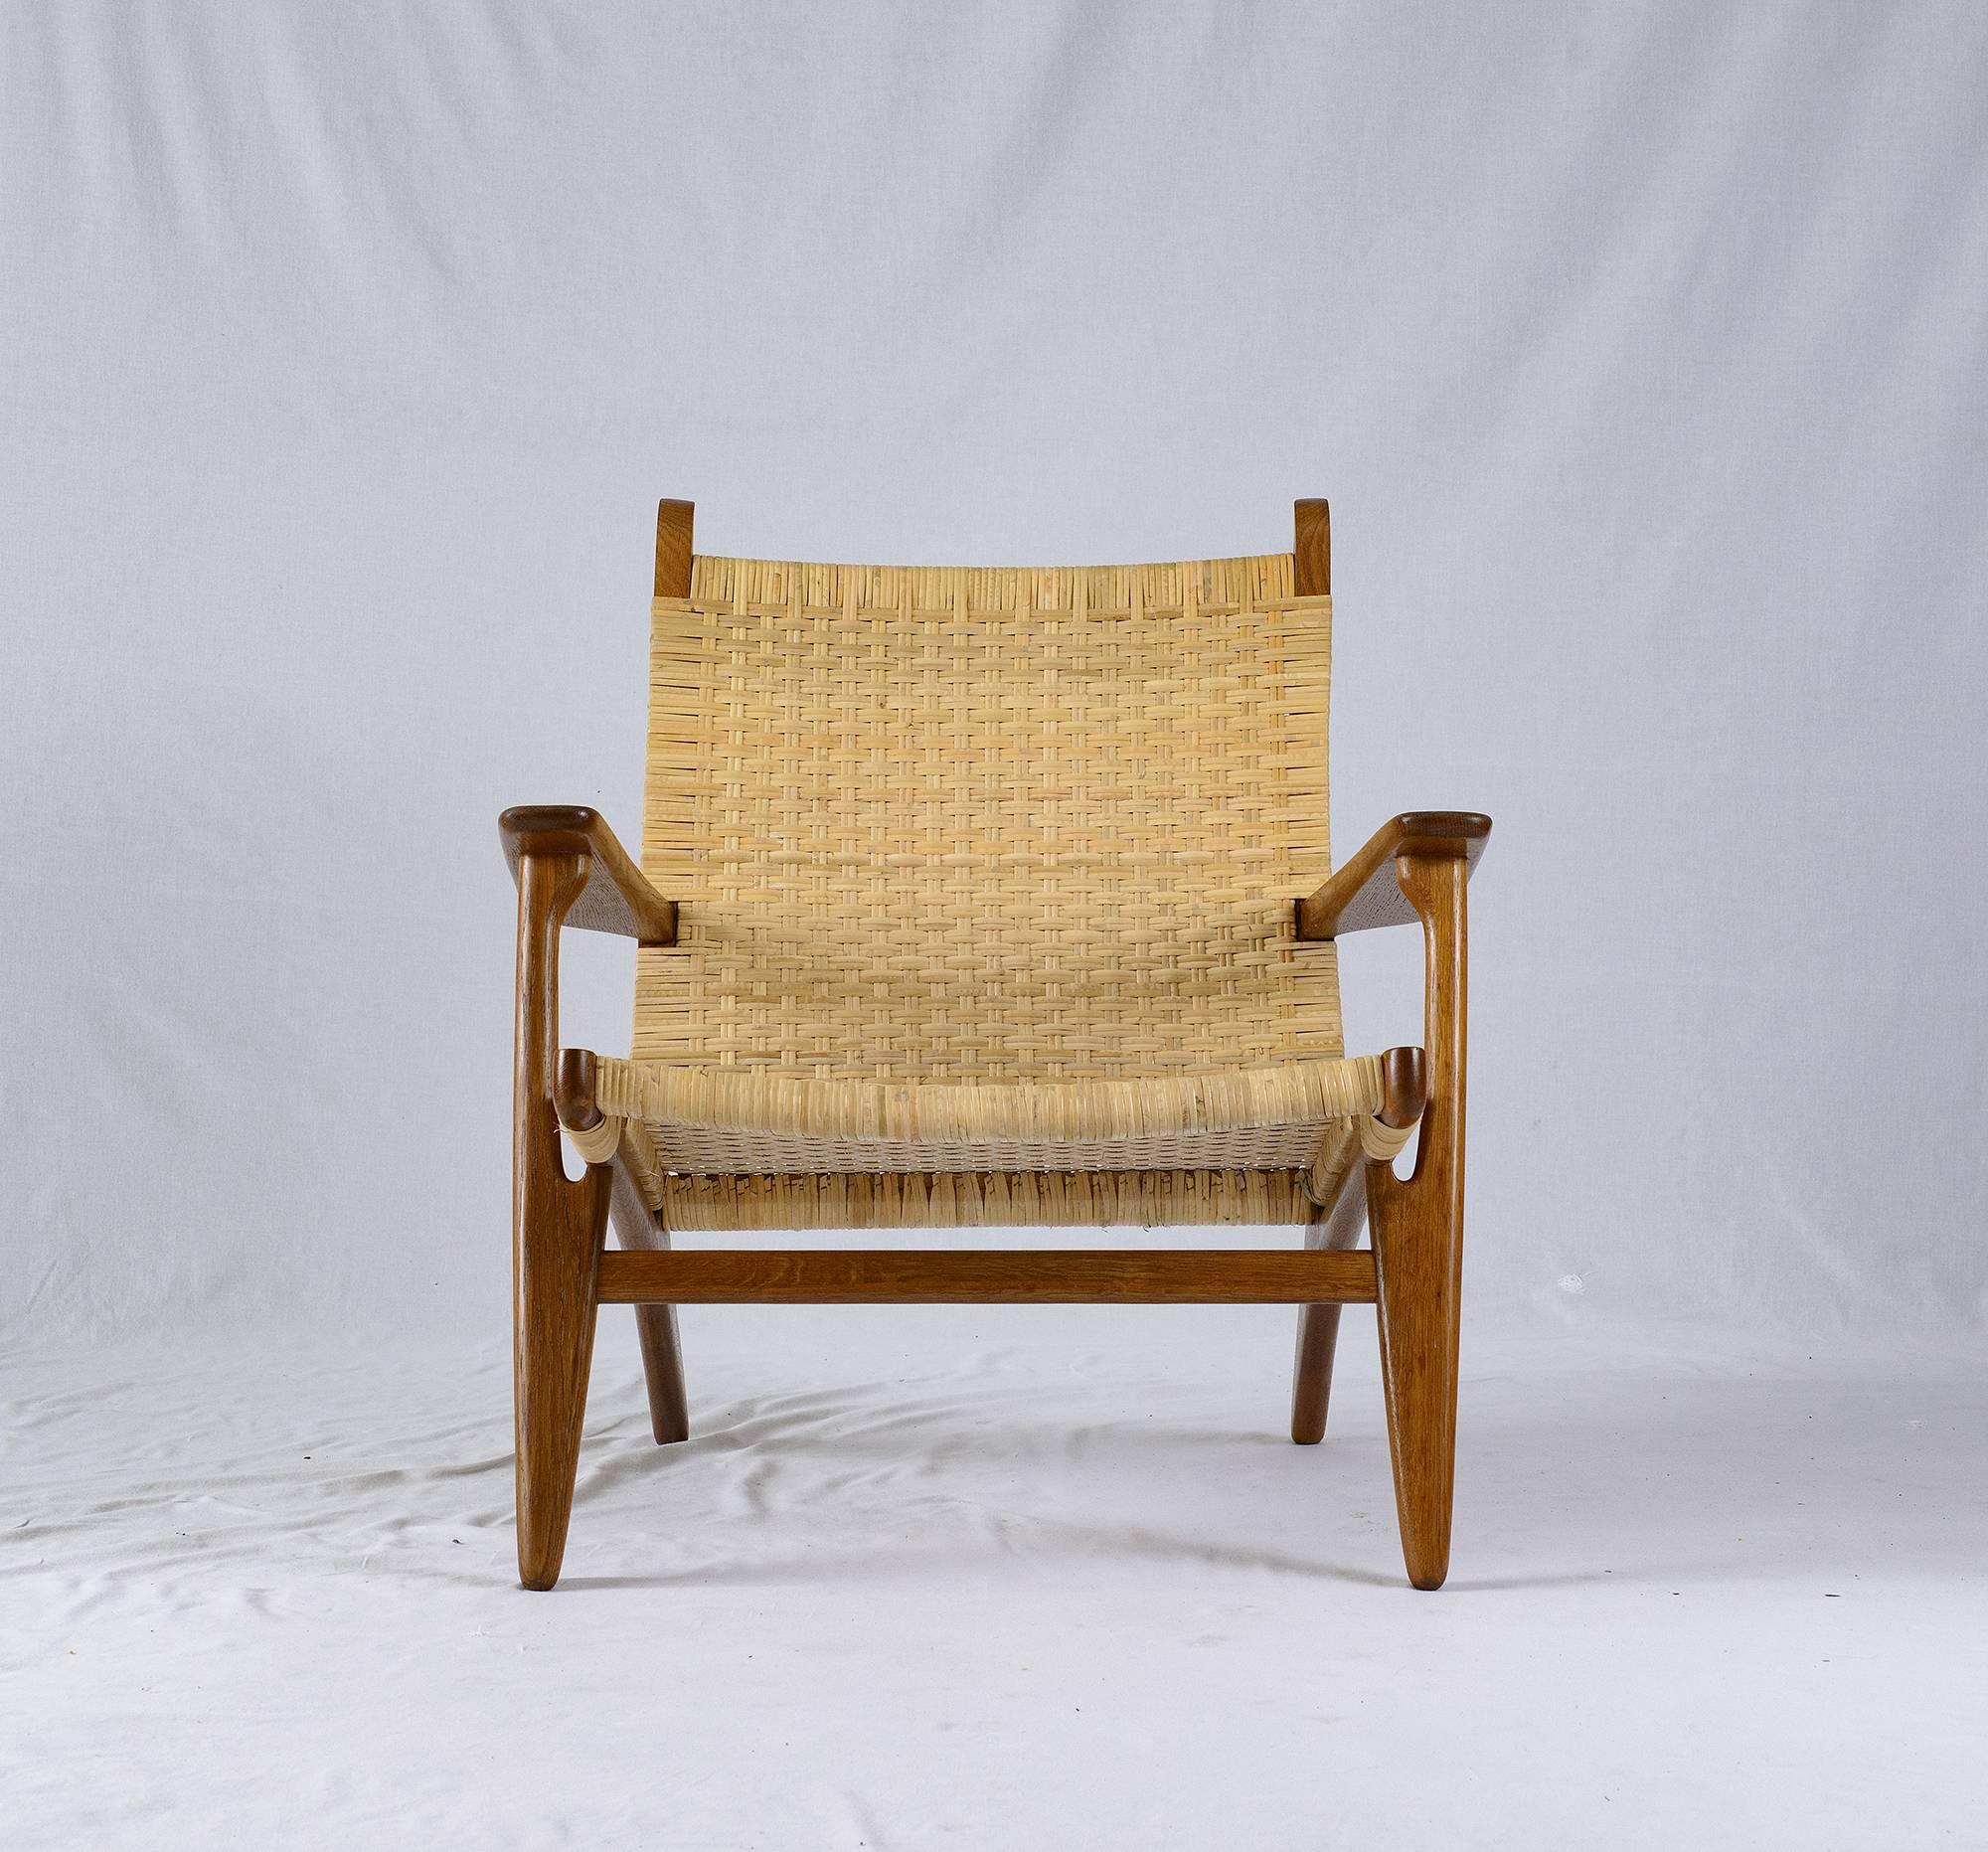 Hans Wegner CH-27 lounge chair designed in 1949 and produced by Carl Hansen.